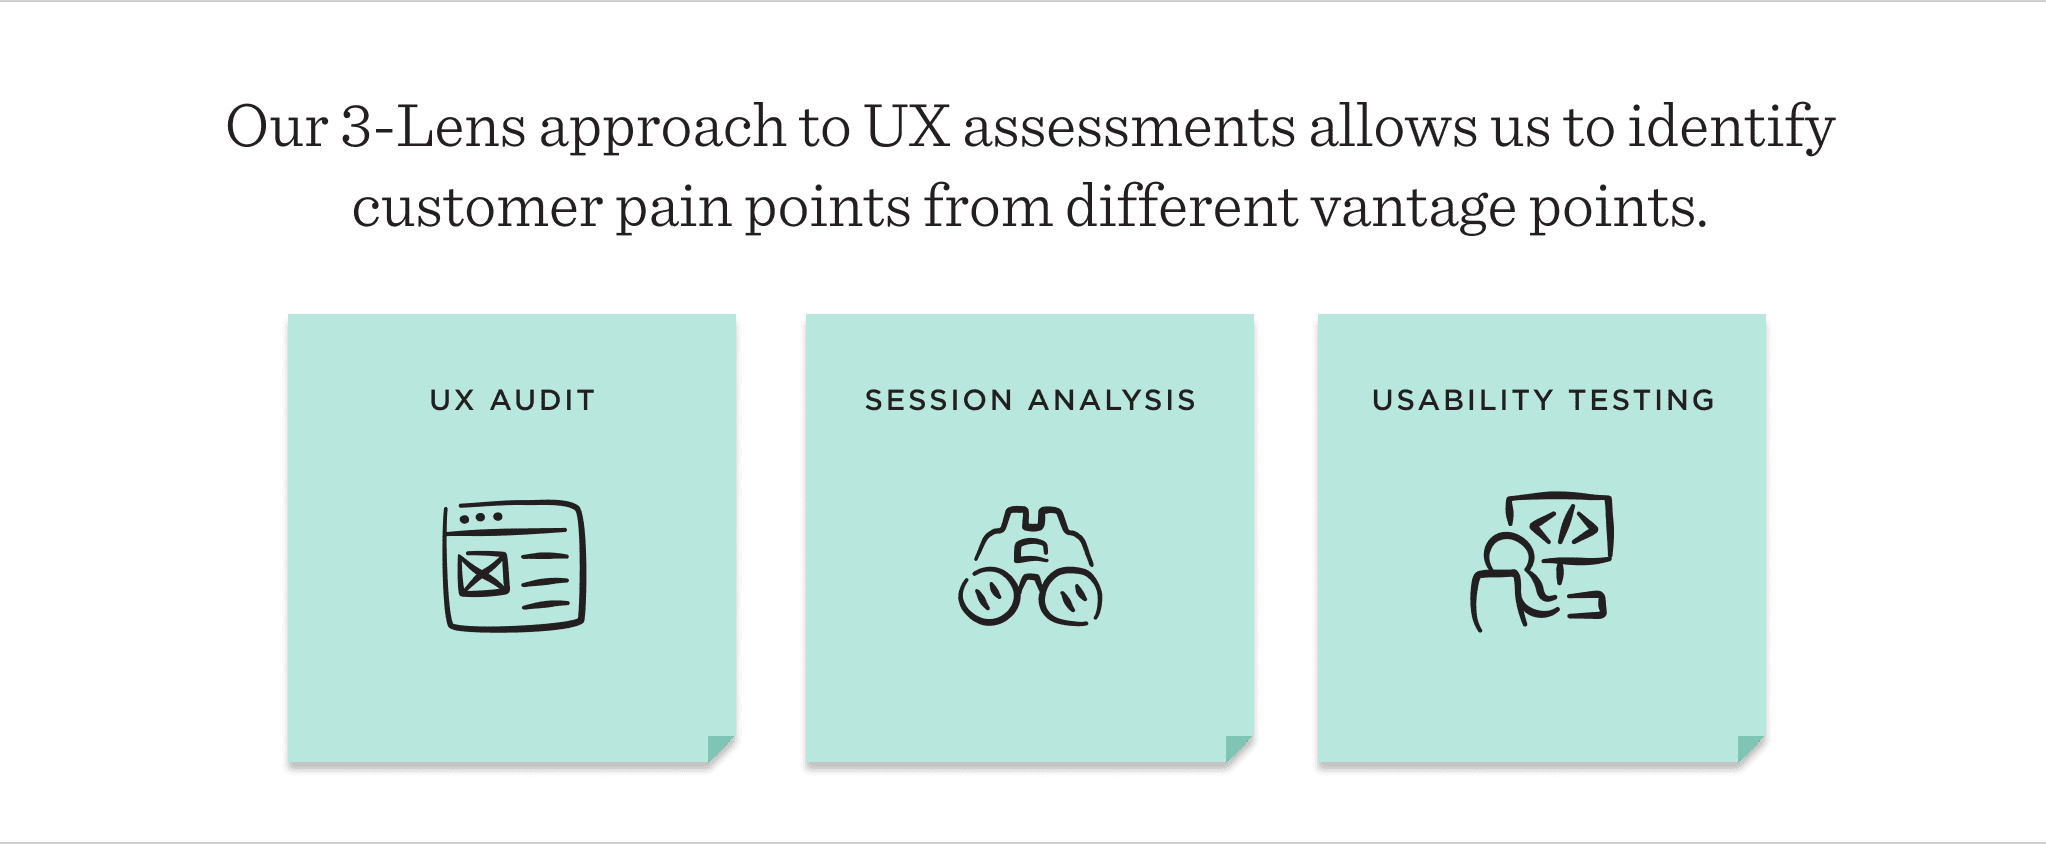 A diagram showing the 3-lens approach to UX assessments which allows us to identify customer pain points from different vantage points.